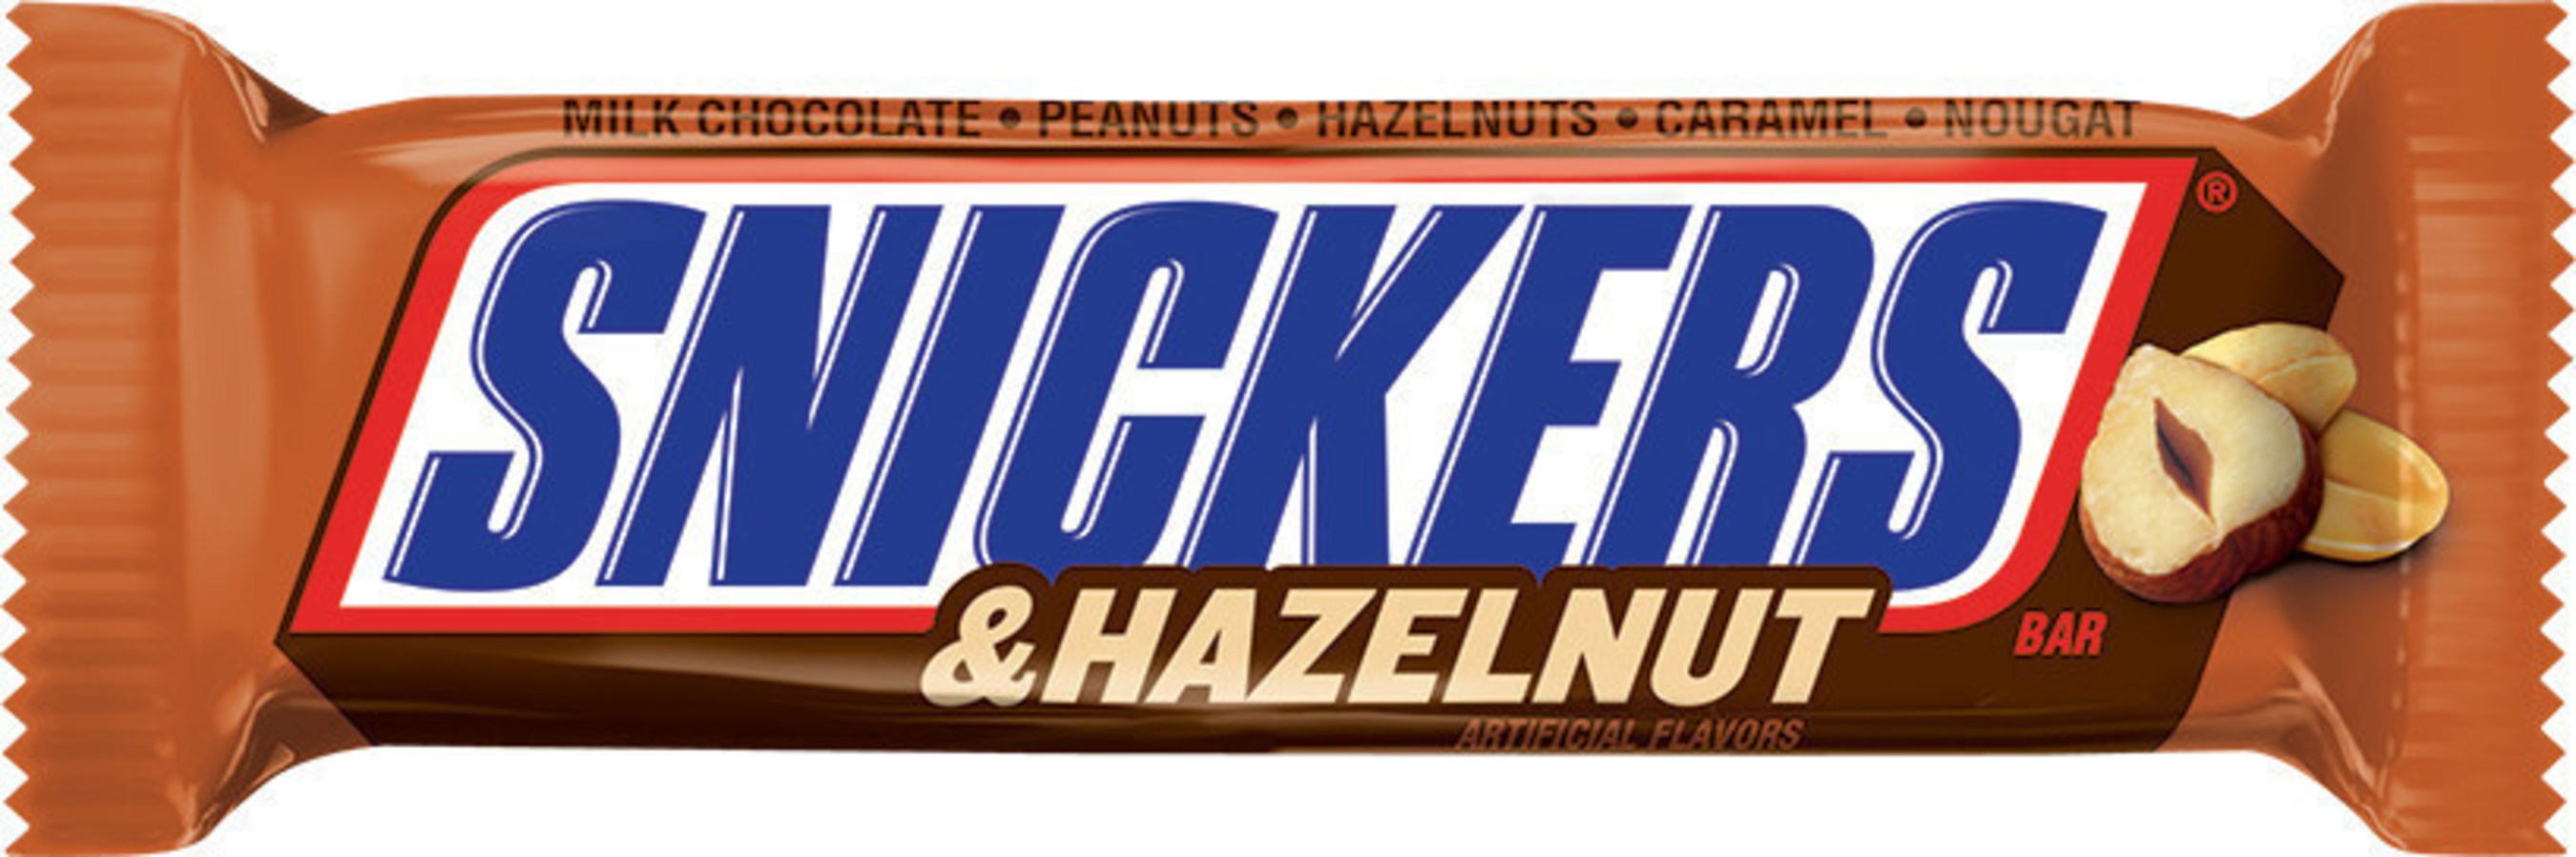 Available in December 2016, SNICKERS(R) Hazelnut satisfies with everything consumers love about SNICKERS(R) -- peanuts, caramel and nougat covered in milk chocolate -- with the addition of delicious hazelnuts.